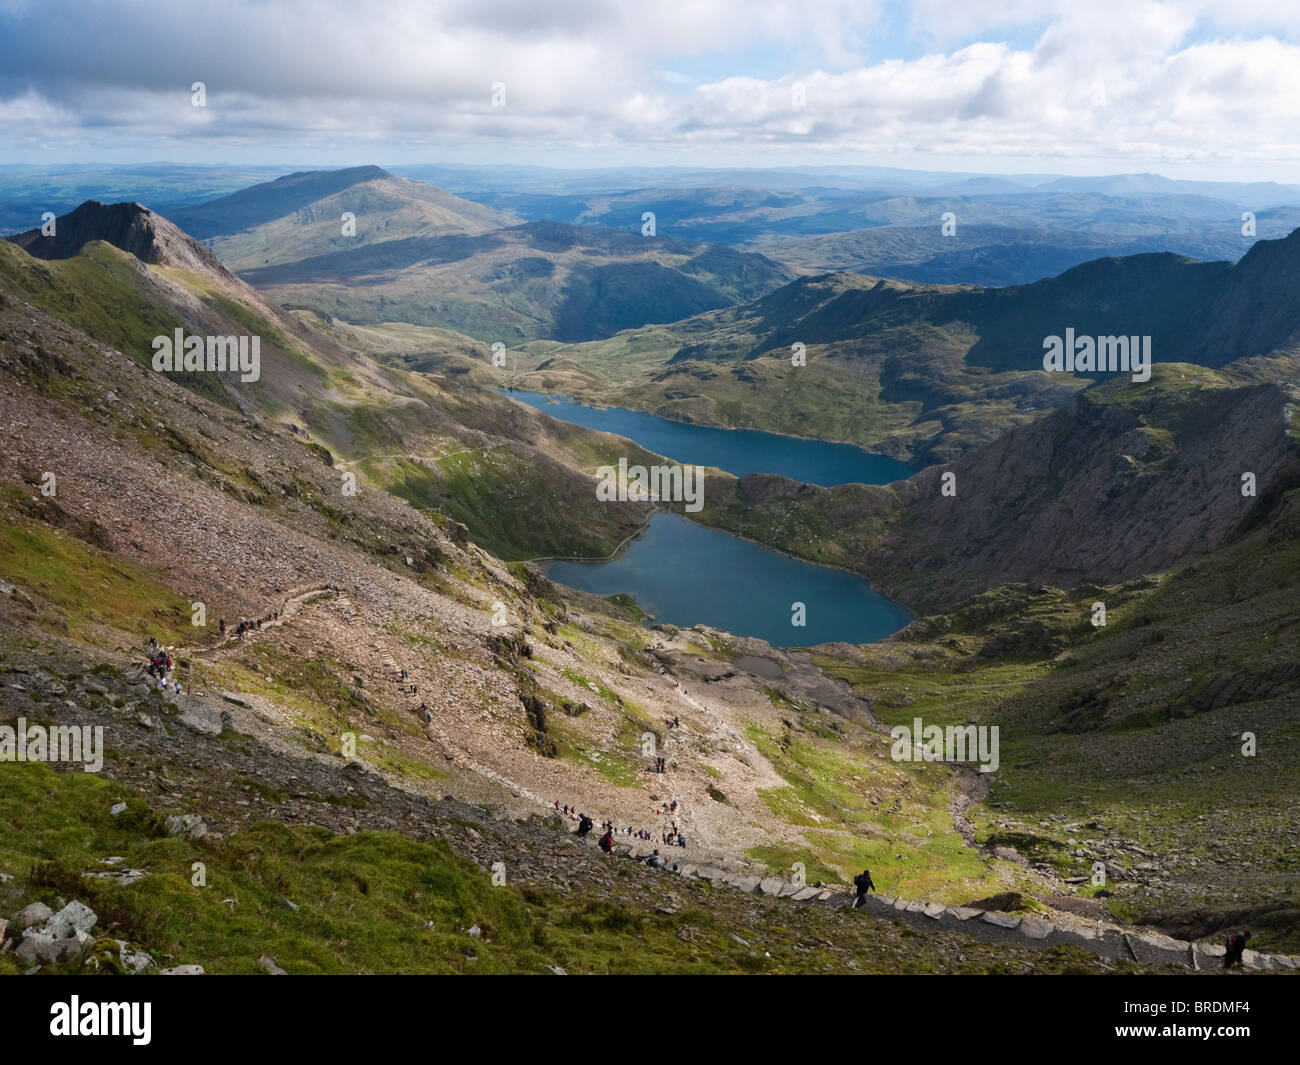 The view down Cwm Dyli from near the top of Snowdon, showing the zig-zags of the Pyg Track, Crib Goch, Glaslyn and Llyn Llydaw Stock Photo